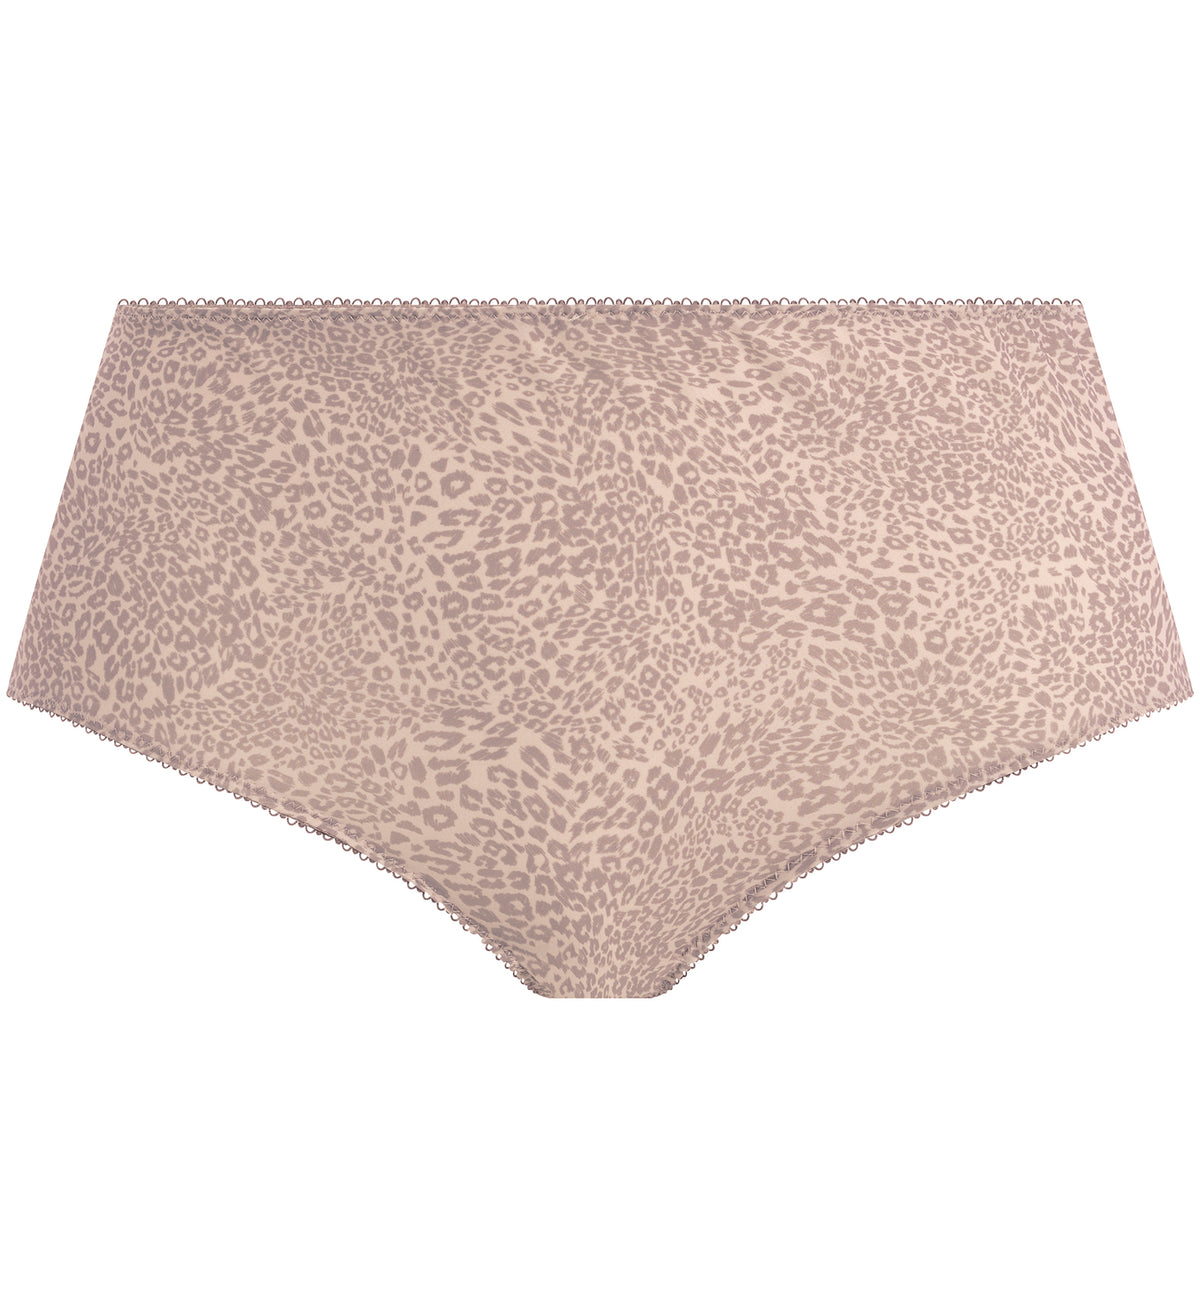 Goddess Kayla Matching Brief (6168),Large,Taupe Leopard - Taupe Leopard,Large